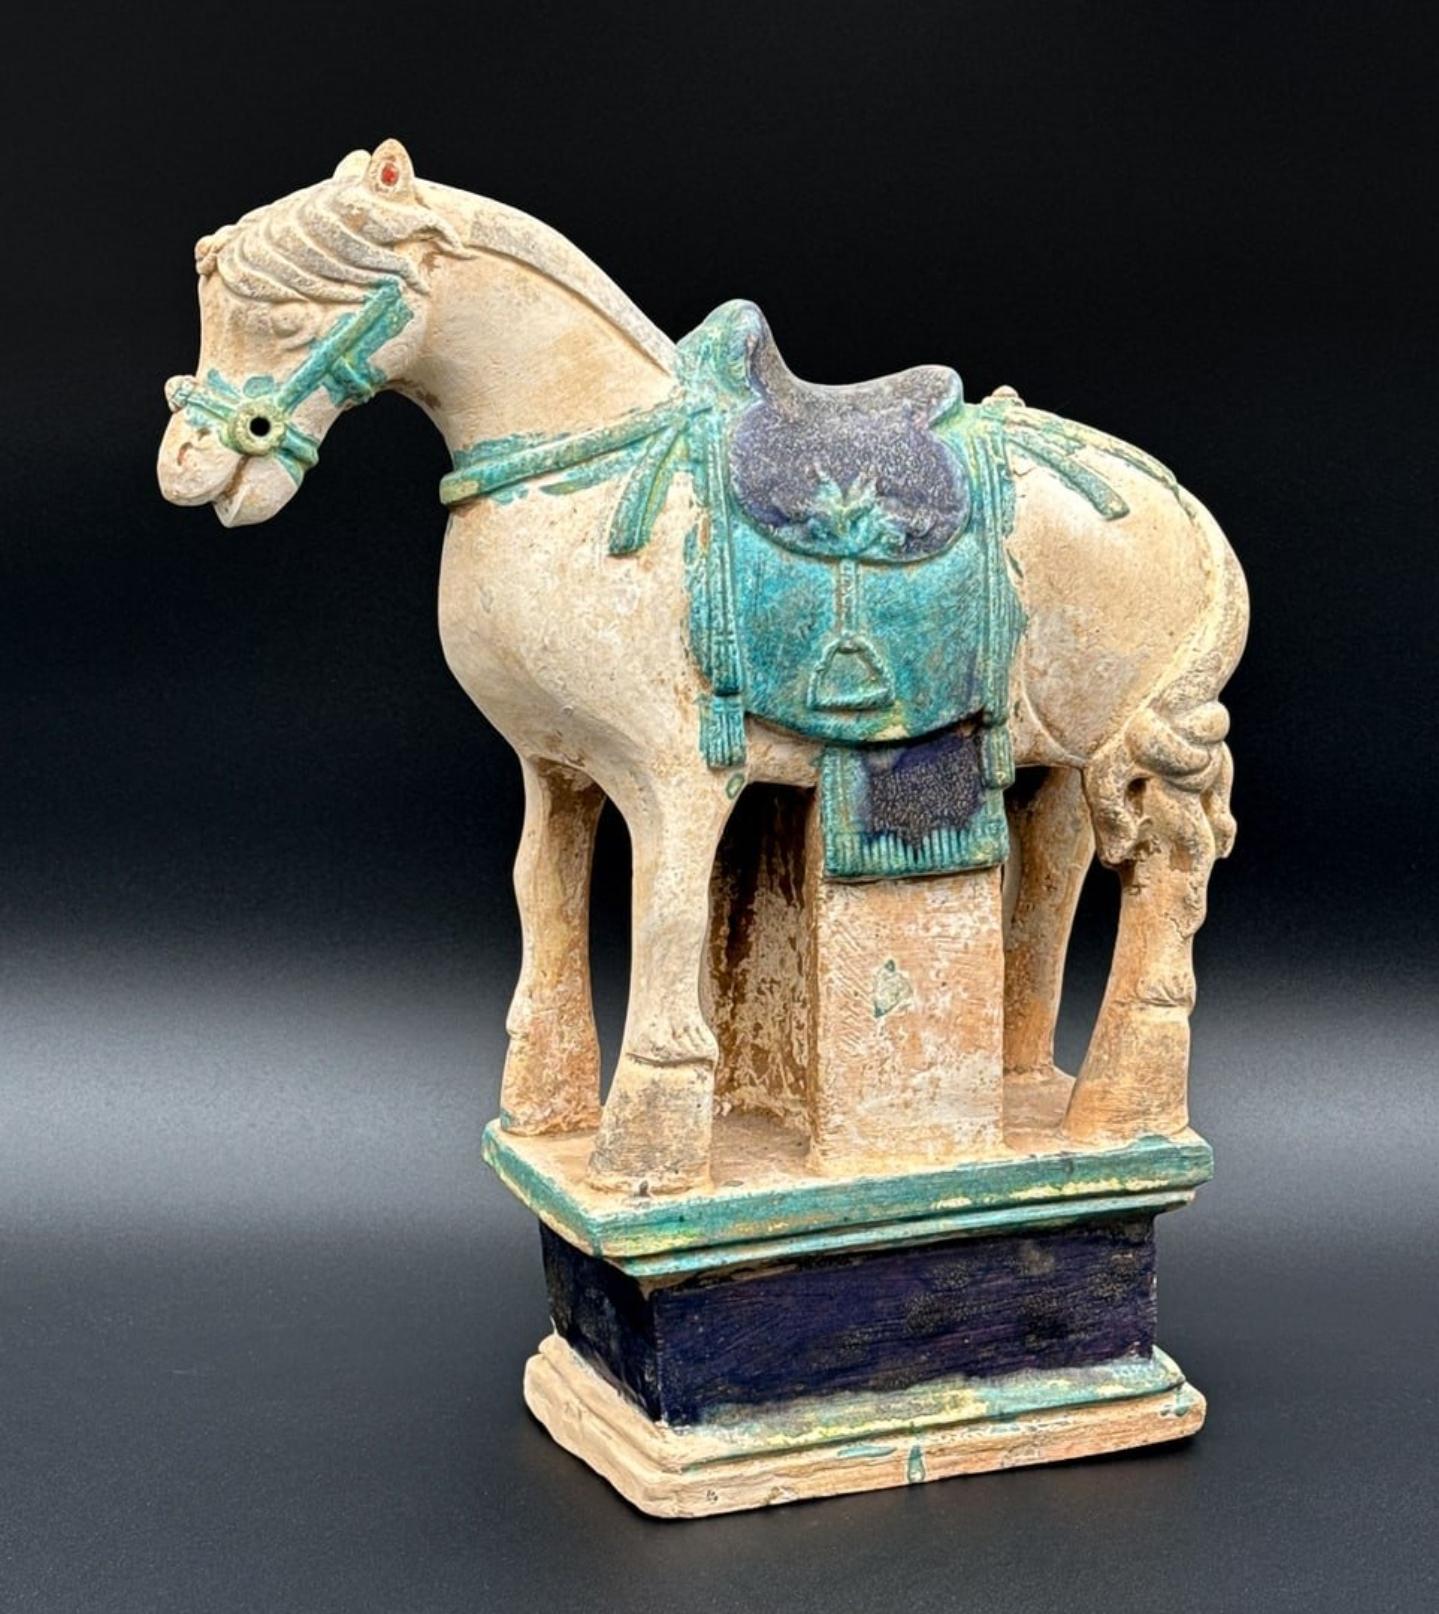 A scarce 600 year old (approx) Chinese pottery Ming Dynasty (1368-1644) large glazed earthenware míngqì tomb figure, modeled as horse sculpture with saddle, stirrups, and integral base.

This hand-crafted Chinese earthenware horse is a type of